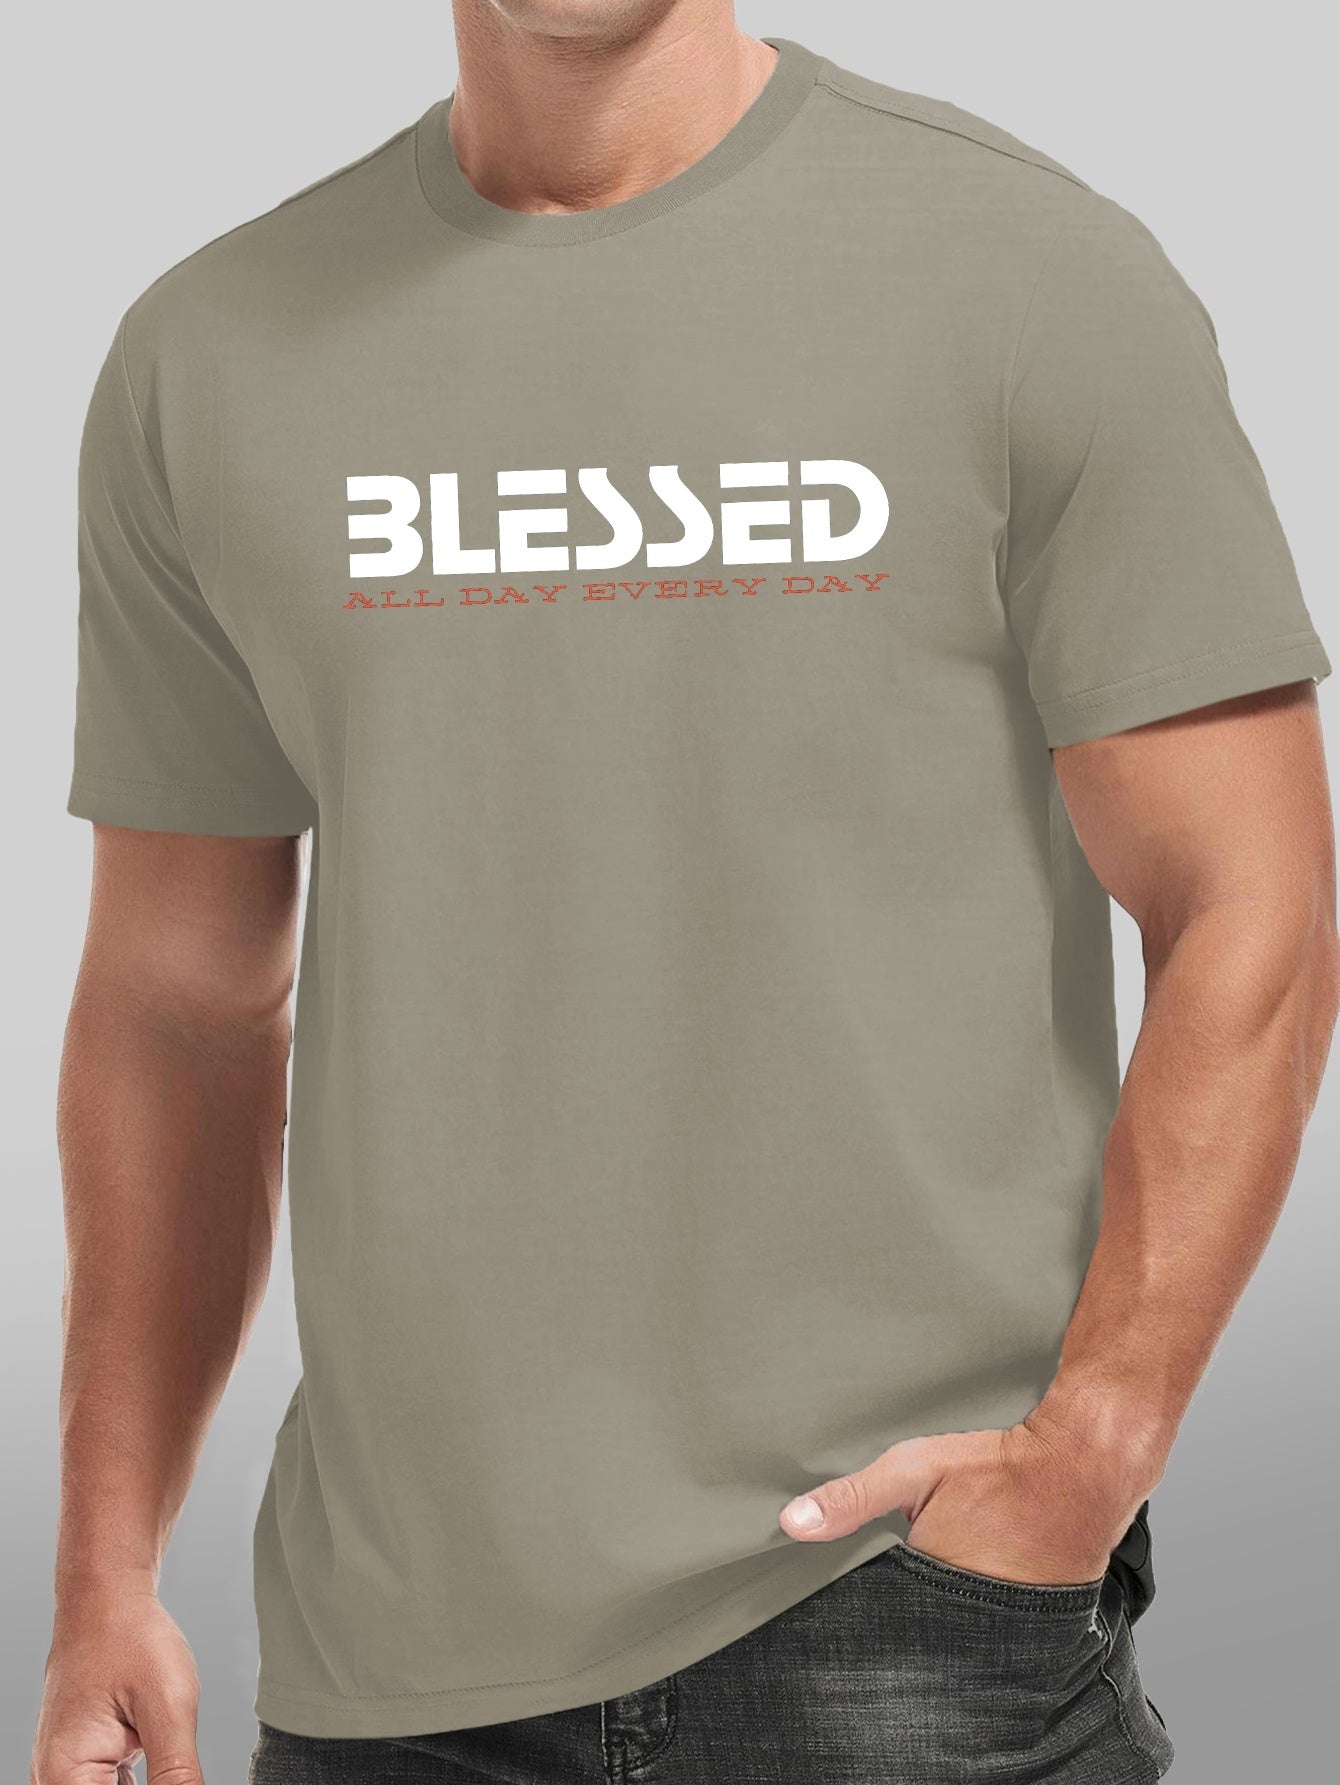 BLESSED All Day Every Day Men's Christian T-shirt claimedbygoddesigns